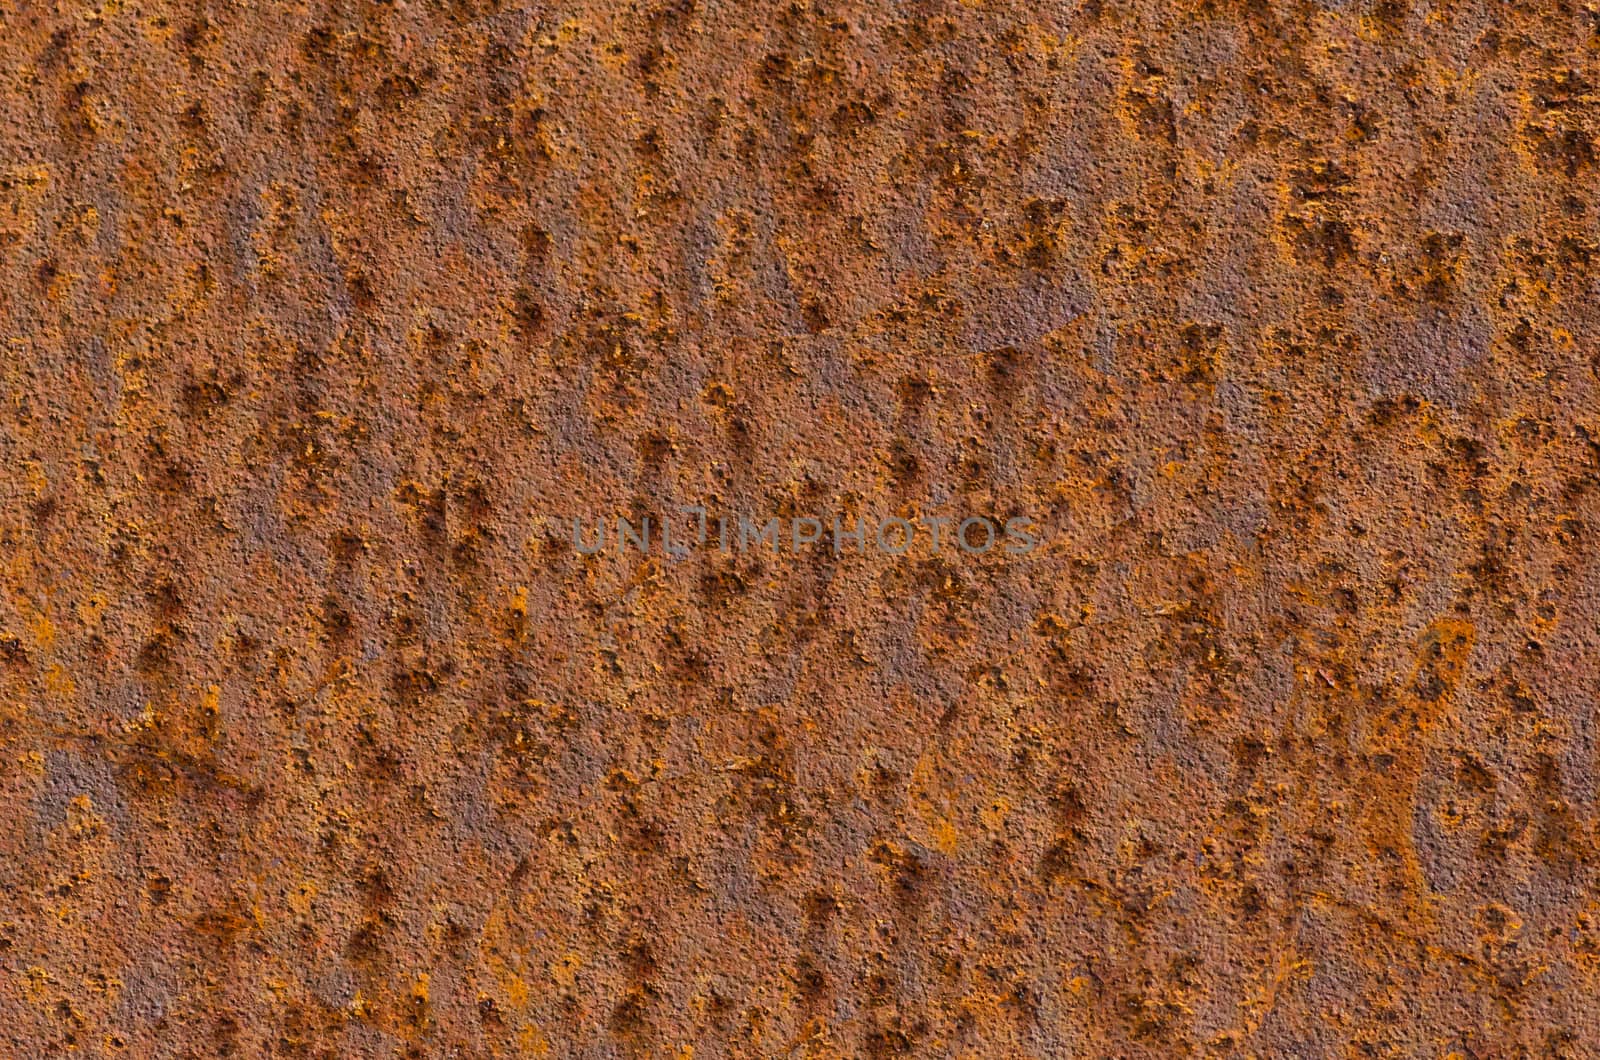 Rusty iron background with beautiful structure
